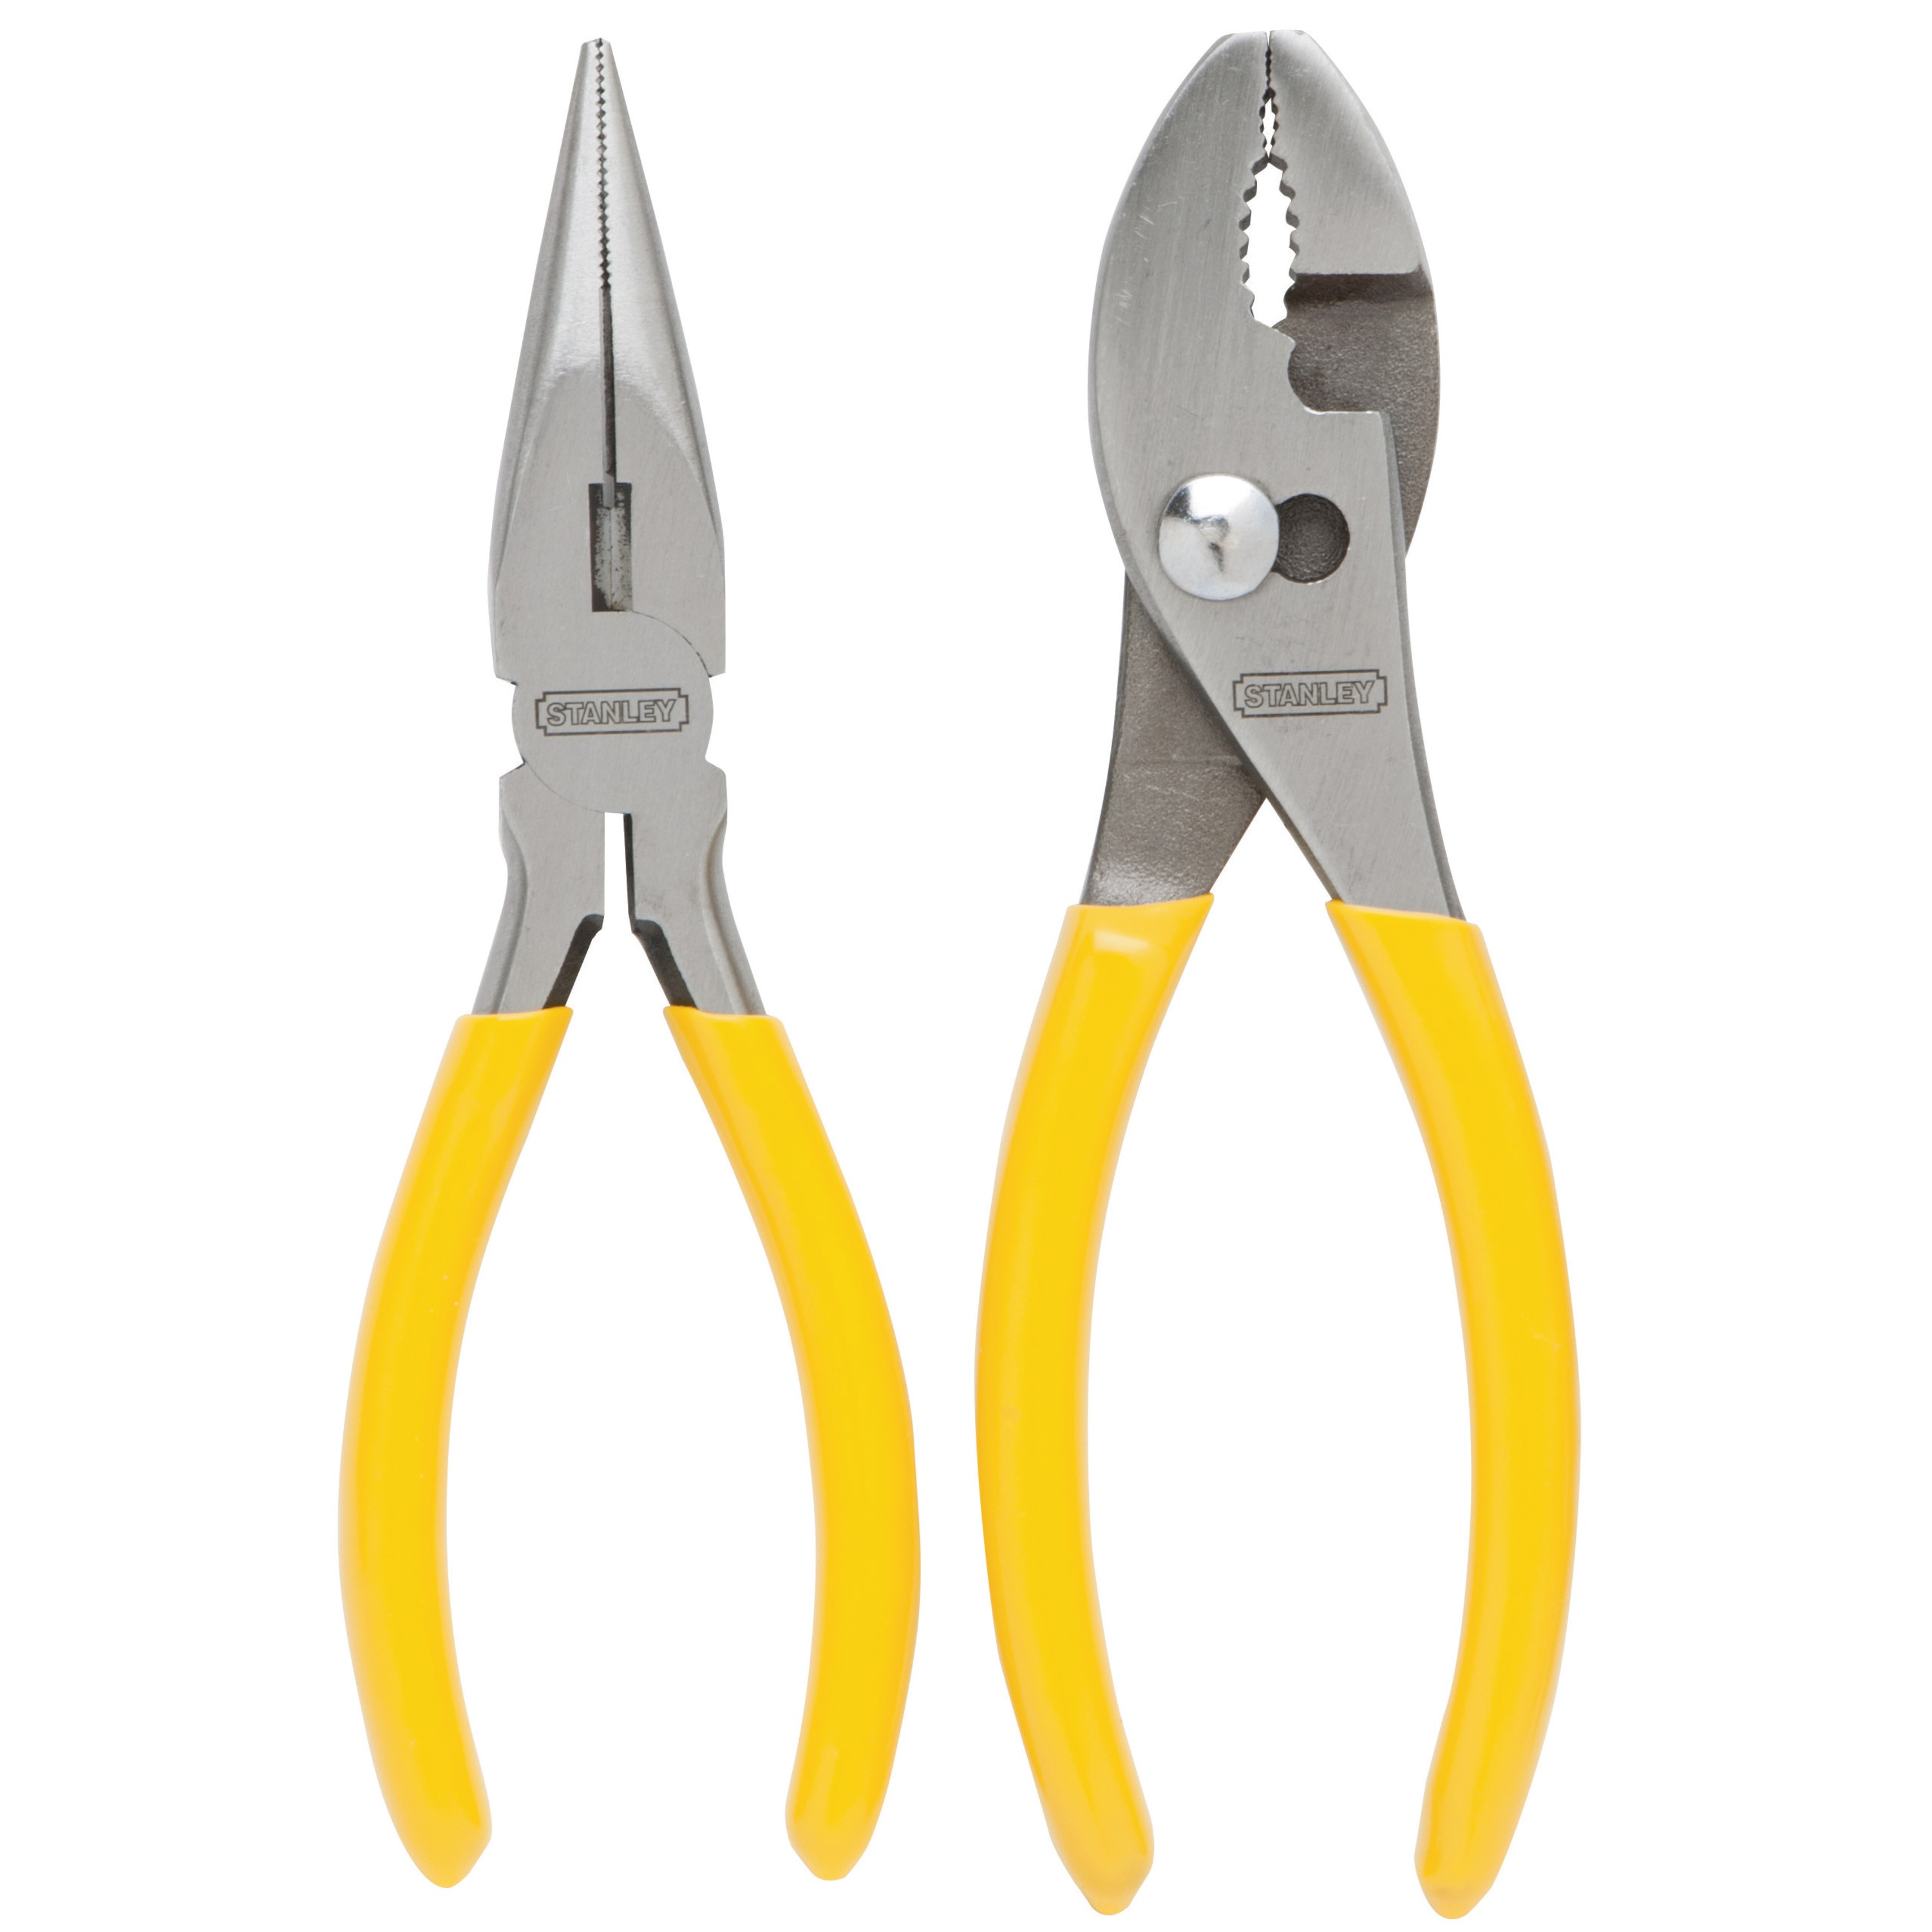 Stanley Tools - 6 in Slip Joint and Long Nose Pliers Set 2 pc - 84-212